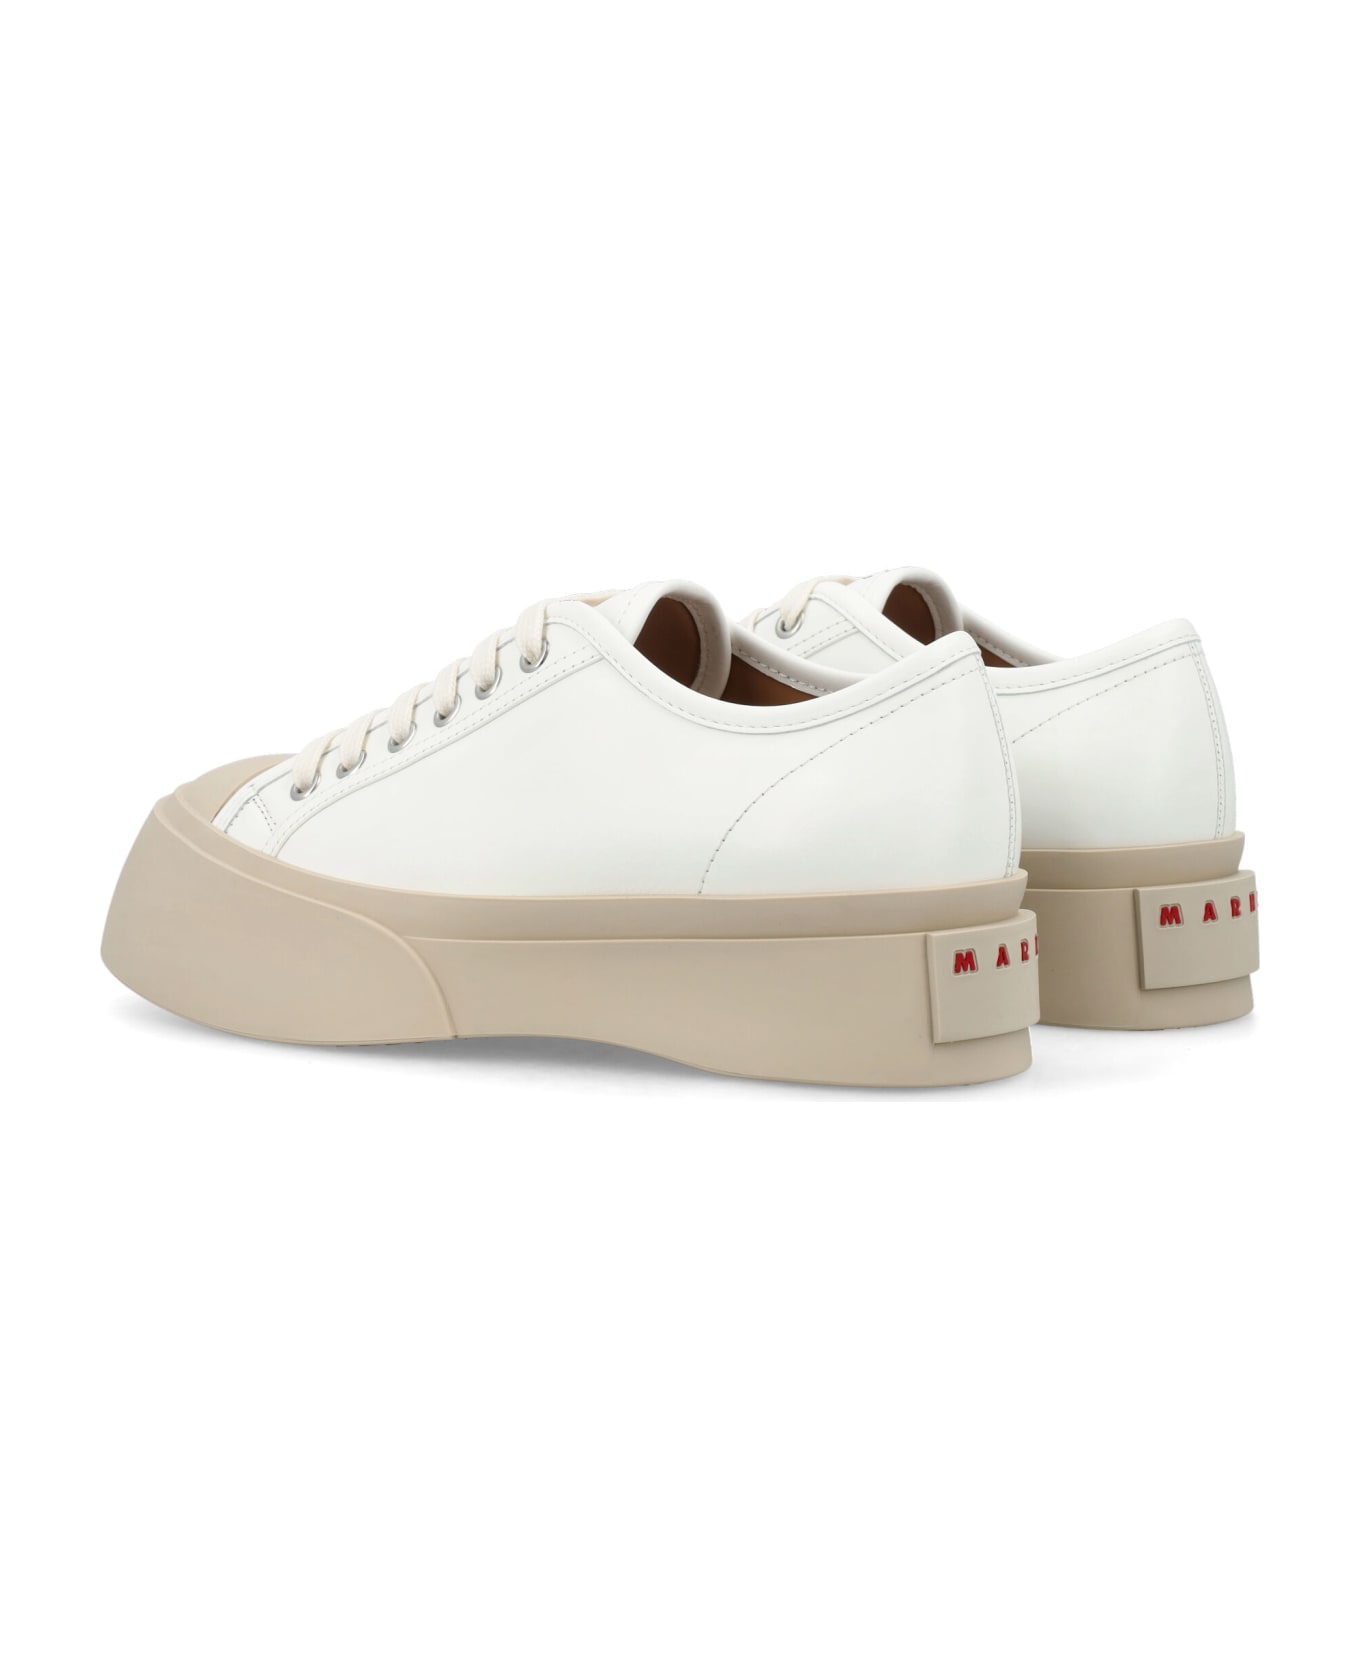 Marni Pablo Lace-up Woman's Sneakers - LILY WHITE